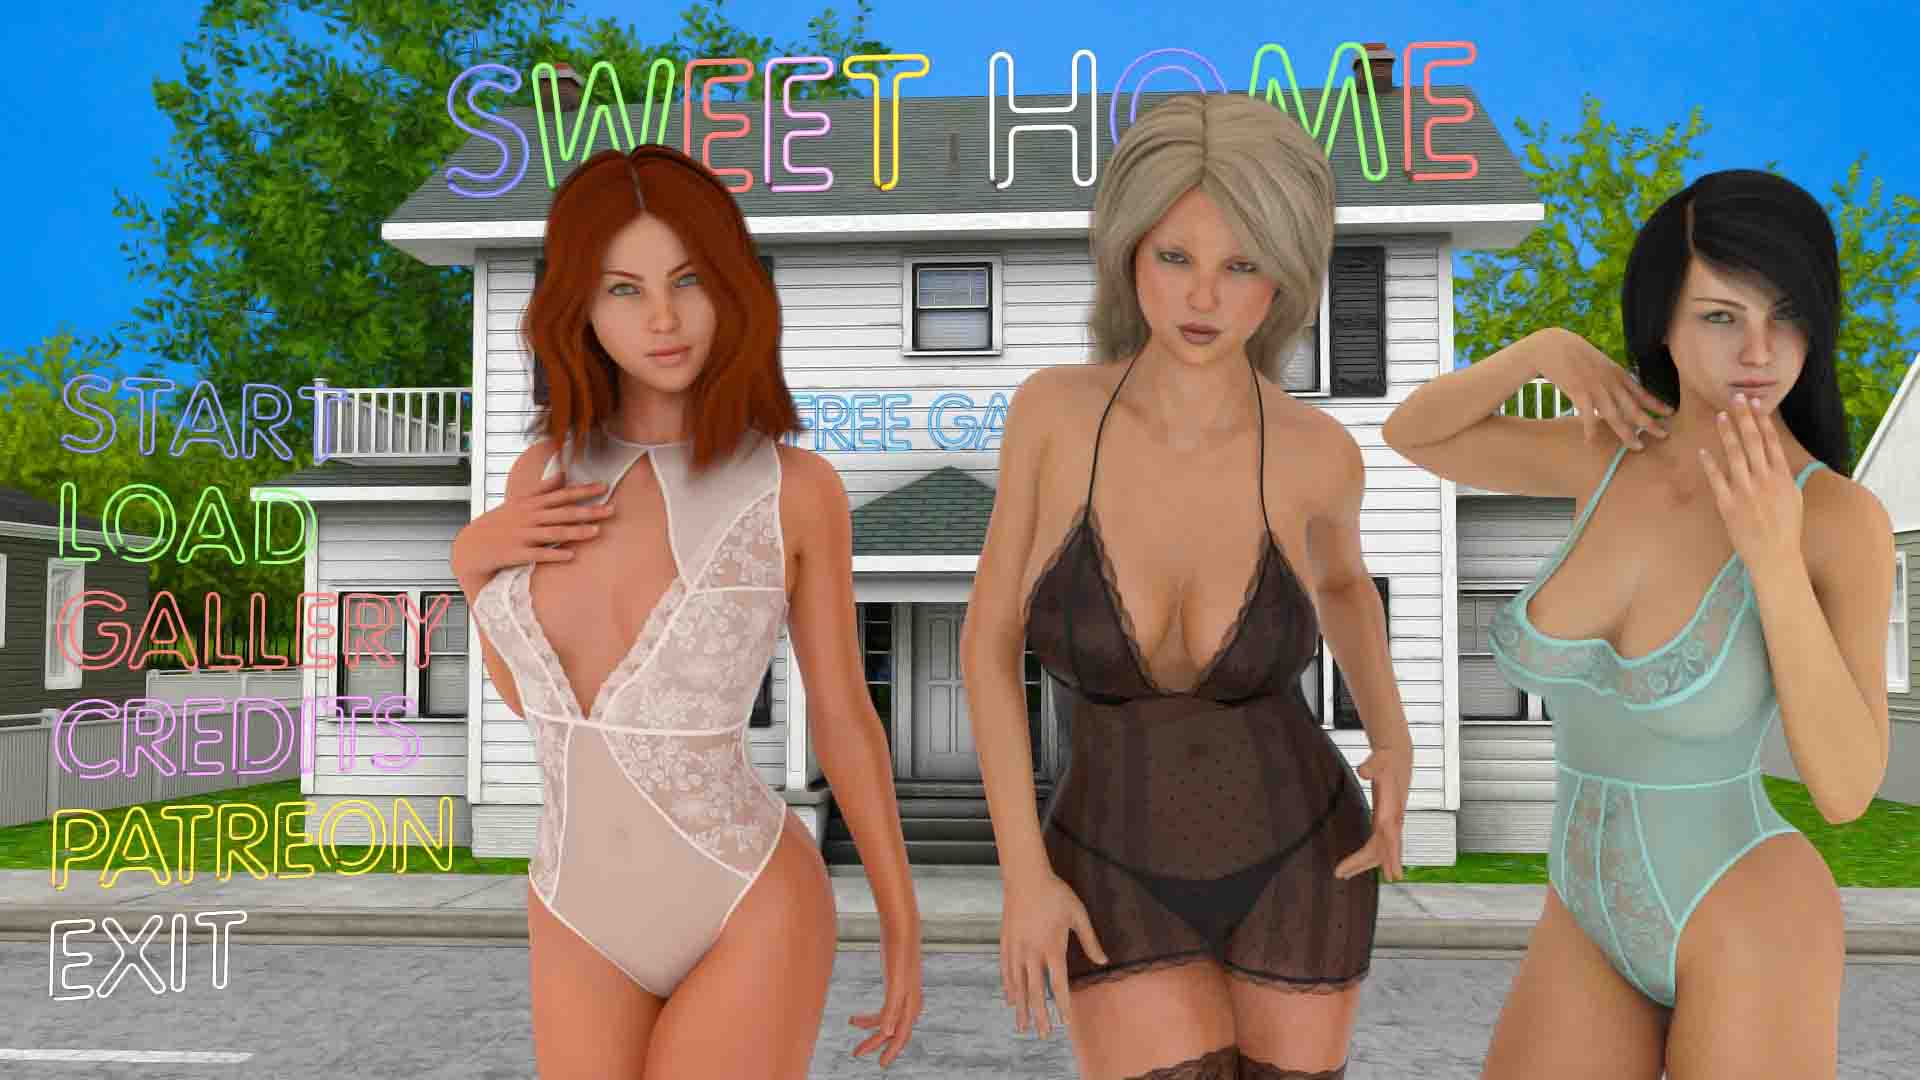 Free Homemade Porn Games - Sweet Home - Version 1a Download